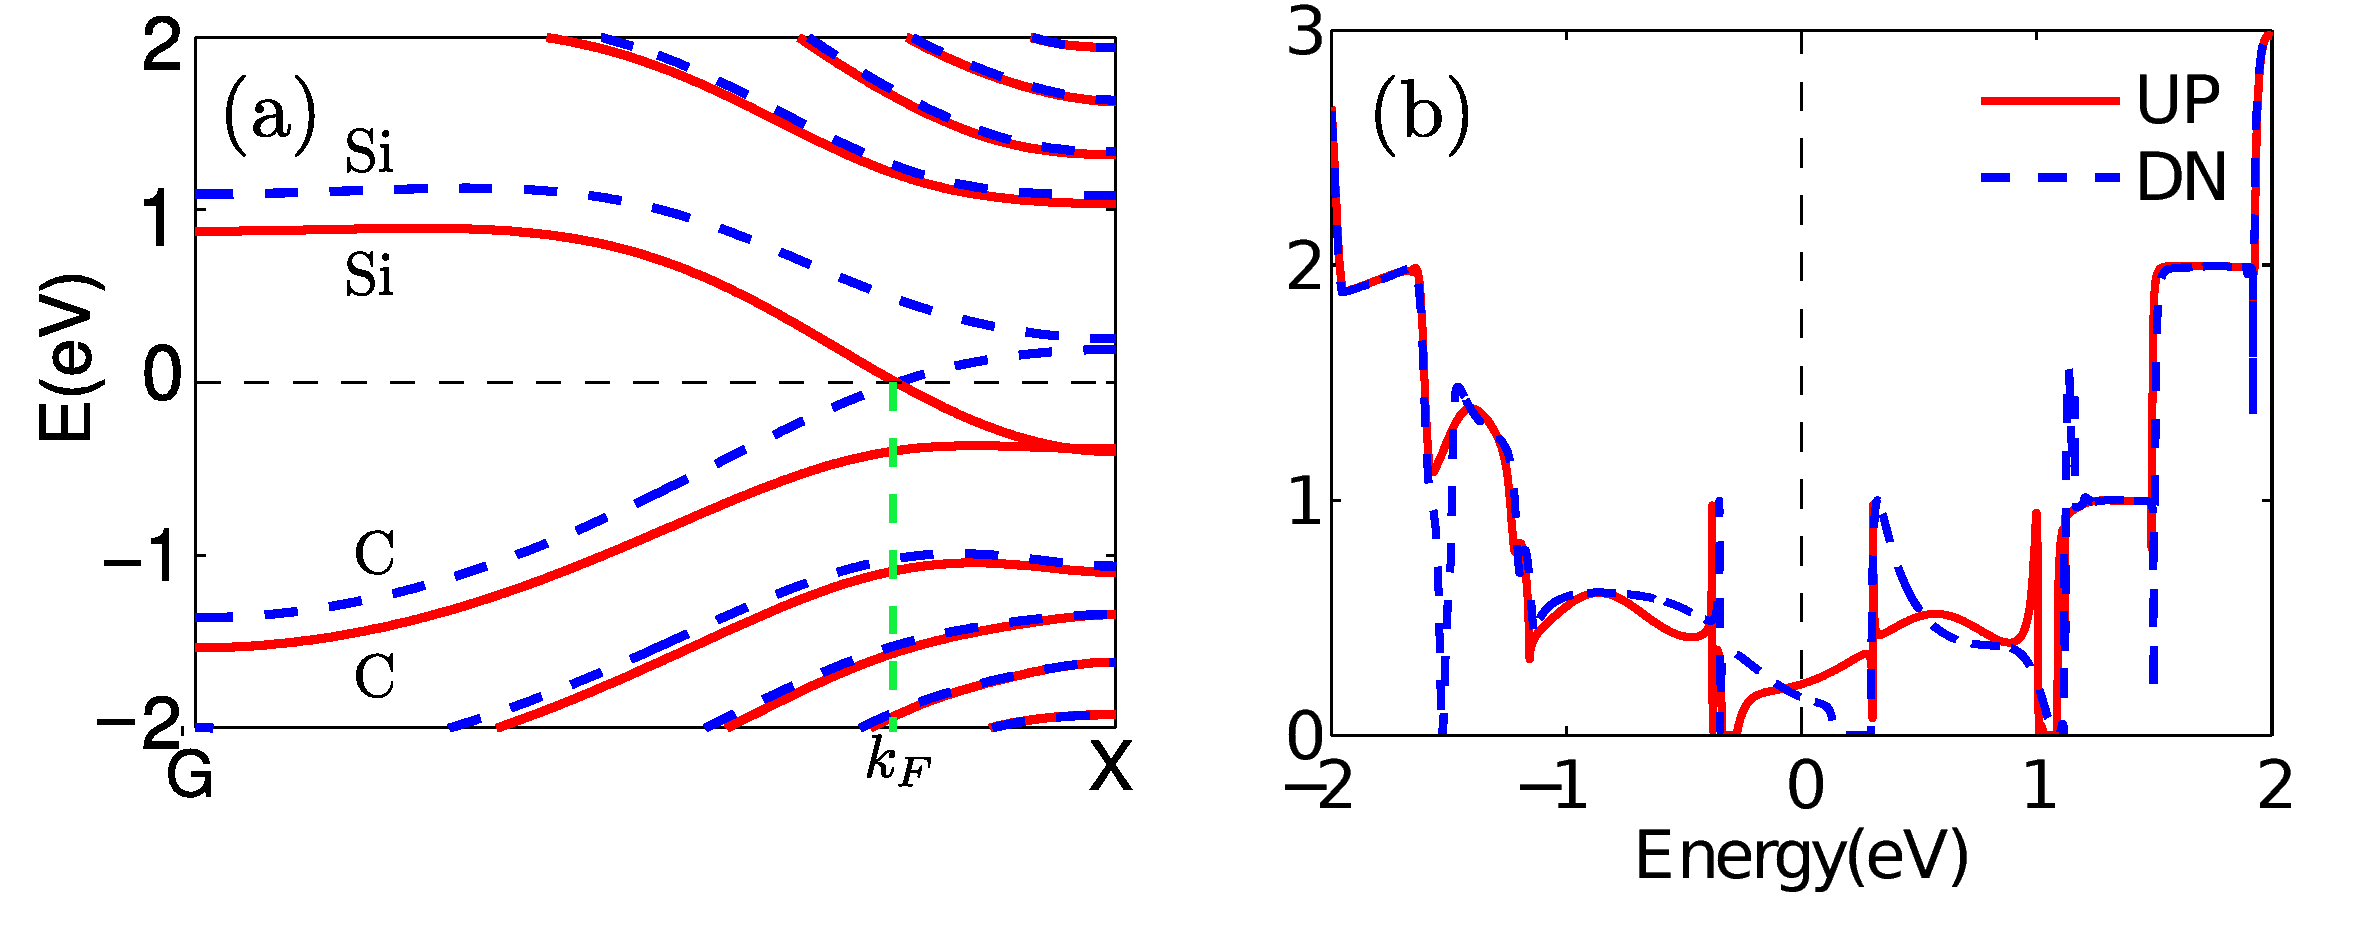 (a) The bandstructure of the ferromagnetic SiC nanoribbon and (b) the spin-polarized transmission functions with B-P co-doping